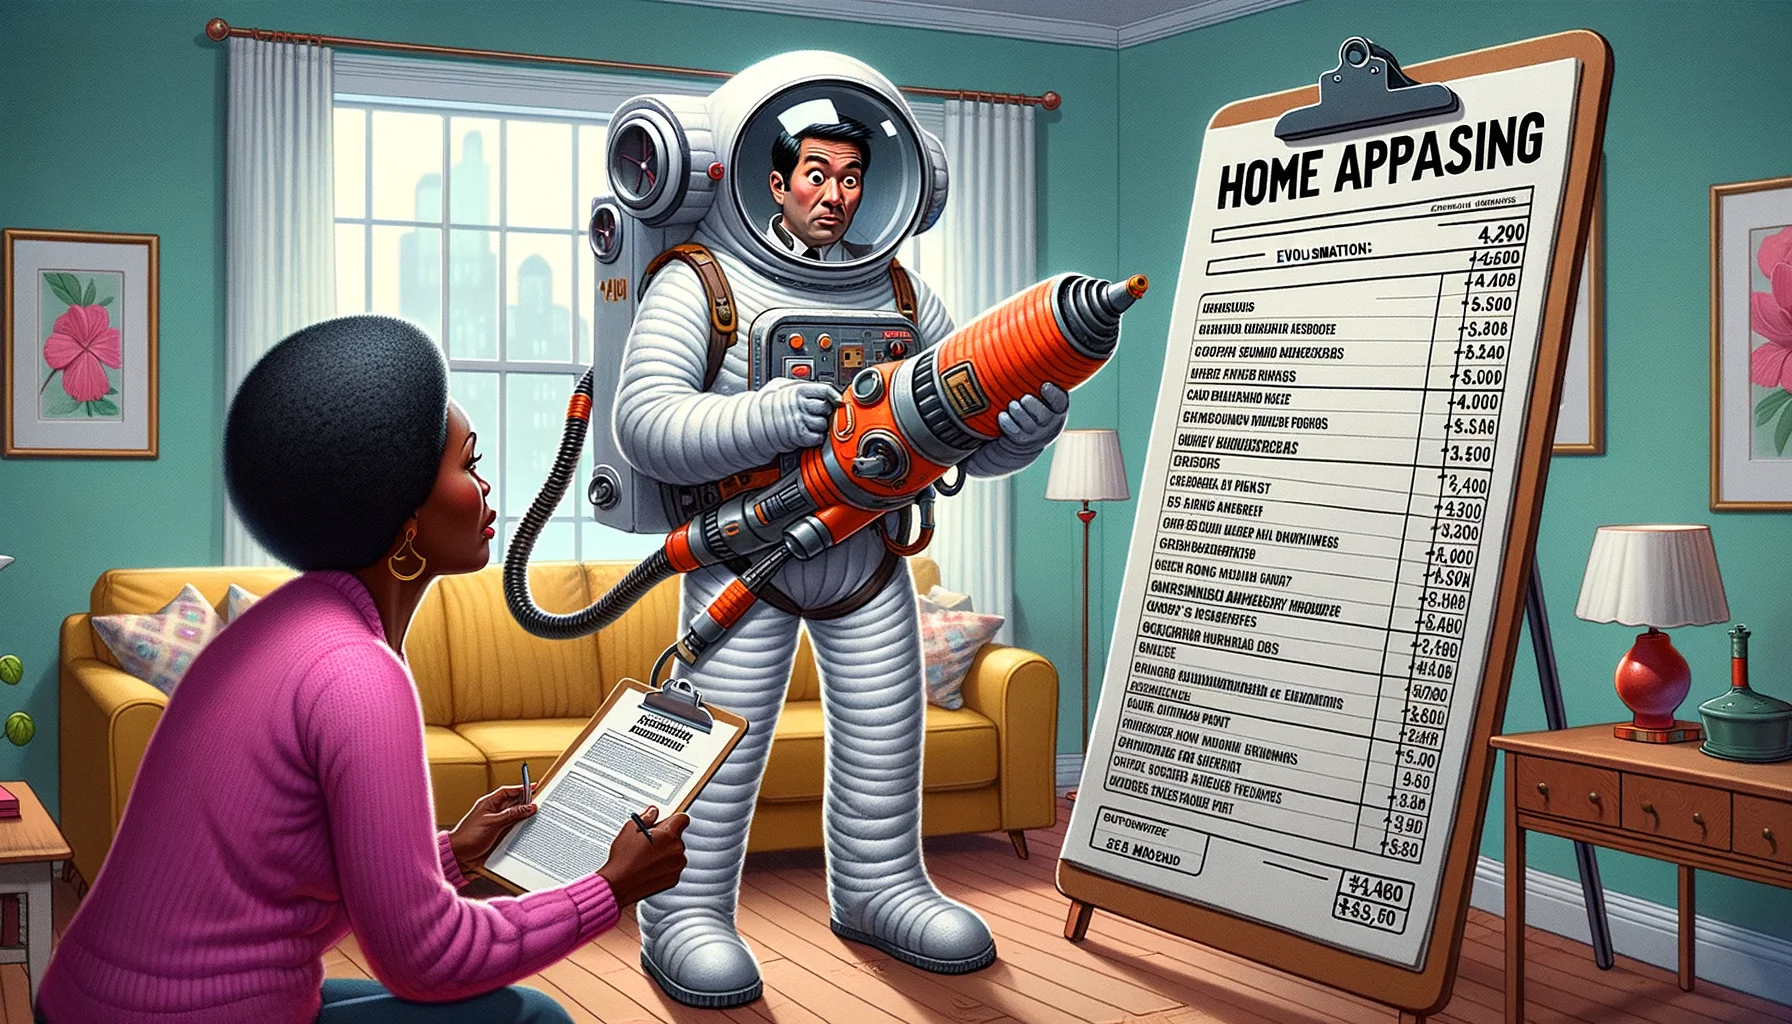 Create a detailed, humorous scene capturing the concept of 'Understanding Home Appraisals'. In the image, a South Asian male appraiser is equipped with complex tools that would normally be fit for a scientist or astronaut, rather than a house appraiser. Performing silly tests such as trying to measure the aroma of the house with a giant and unnecessary device, he stands in the middle of the living room. An African female homeowner watches him, bemused and surprised yet entertained by the comic exaggeration of the home appraisal process. The appraisal sheet on the table shows ridiculously funny evaluation points such as 'Coziness factor of the pillows' or 'Colors and moods of the walls'.